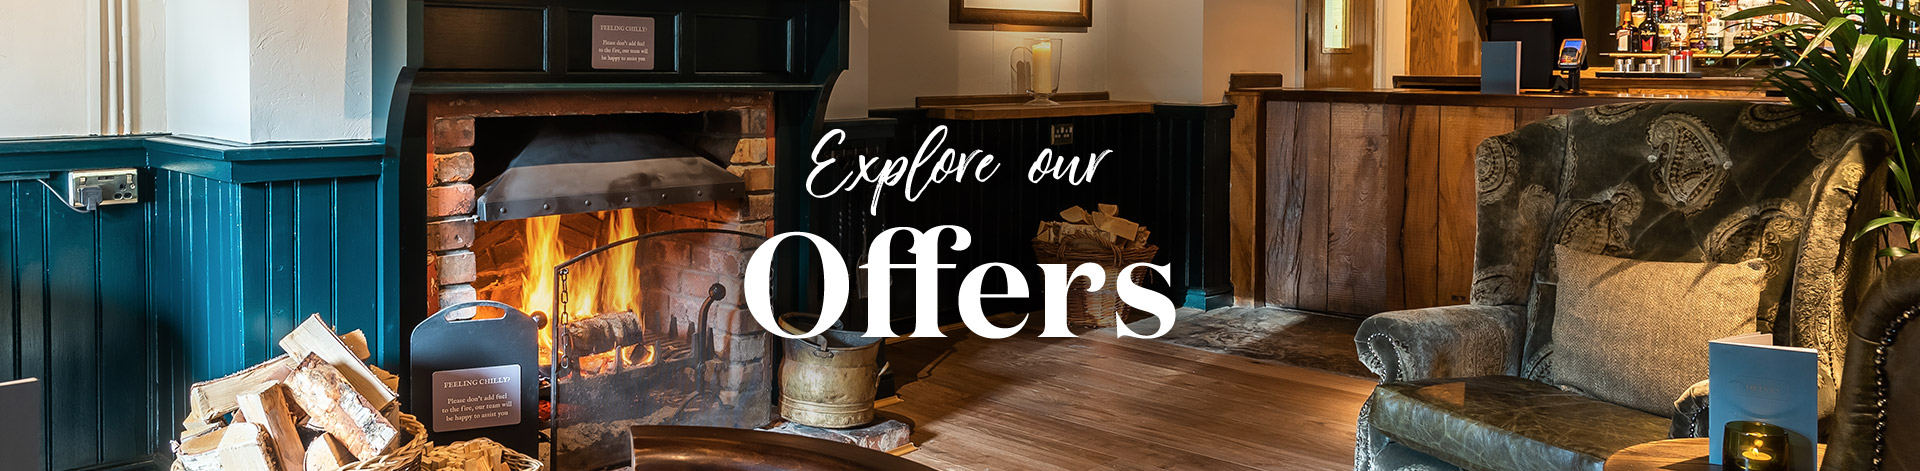 Our latest offers at The Three Jolly Wheelers